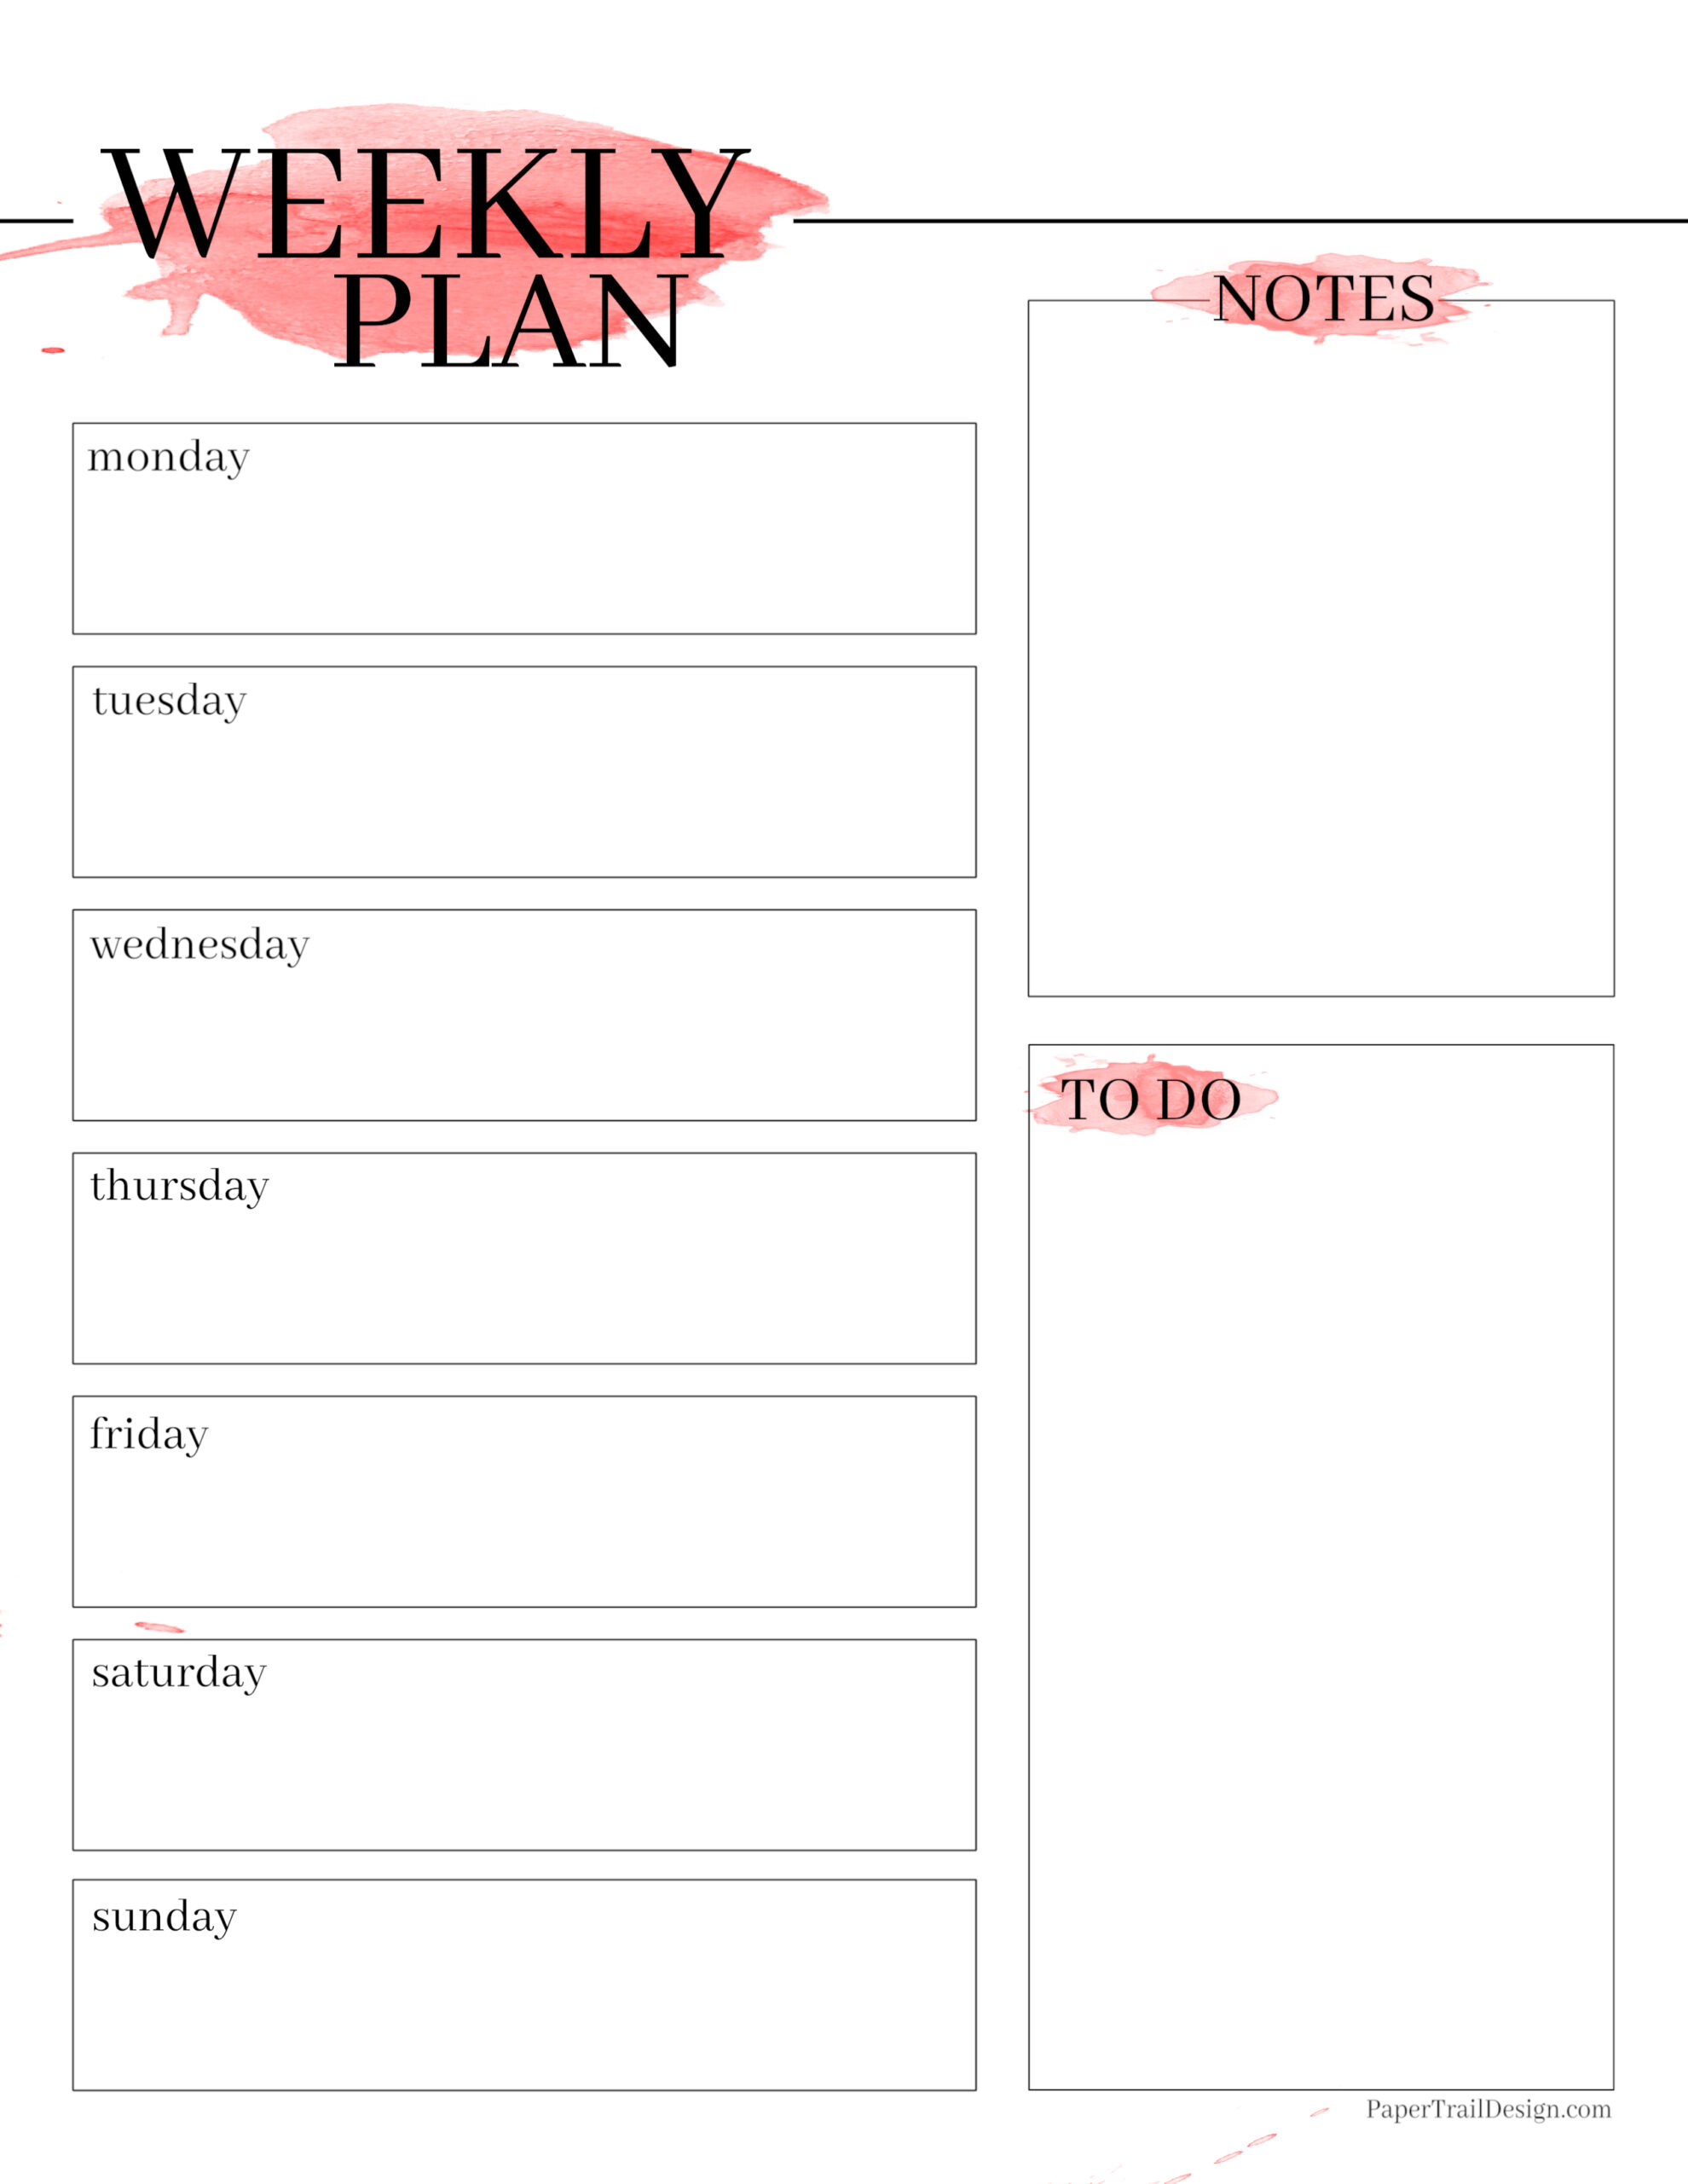 free printable weekly planner template watercolor paper trail design